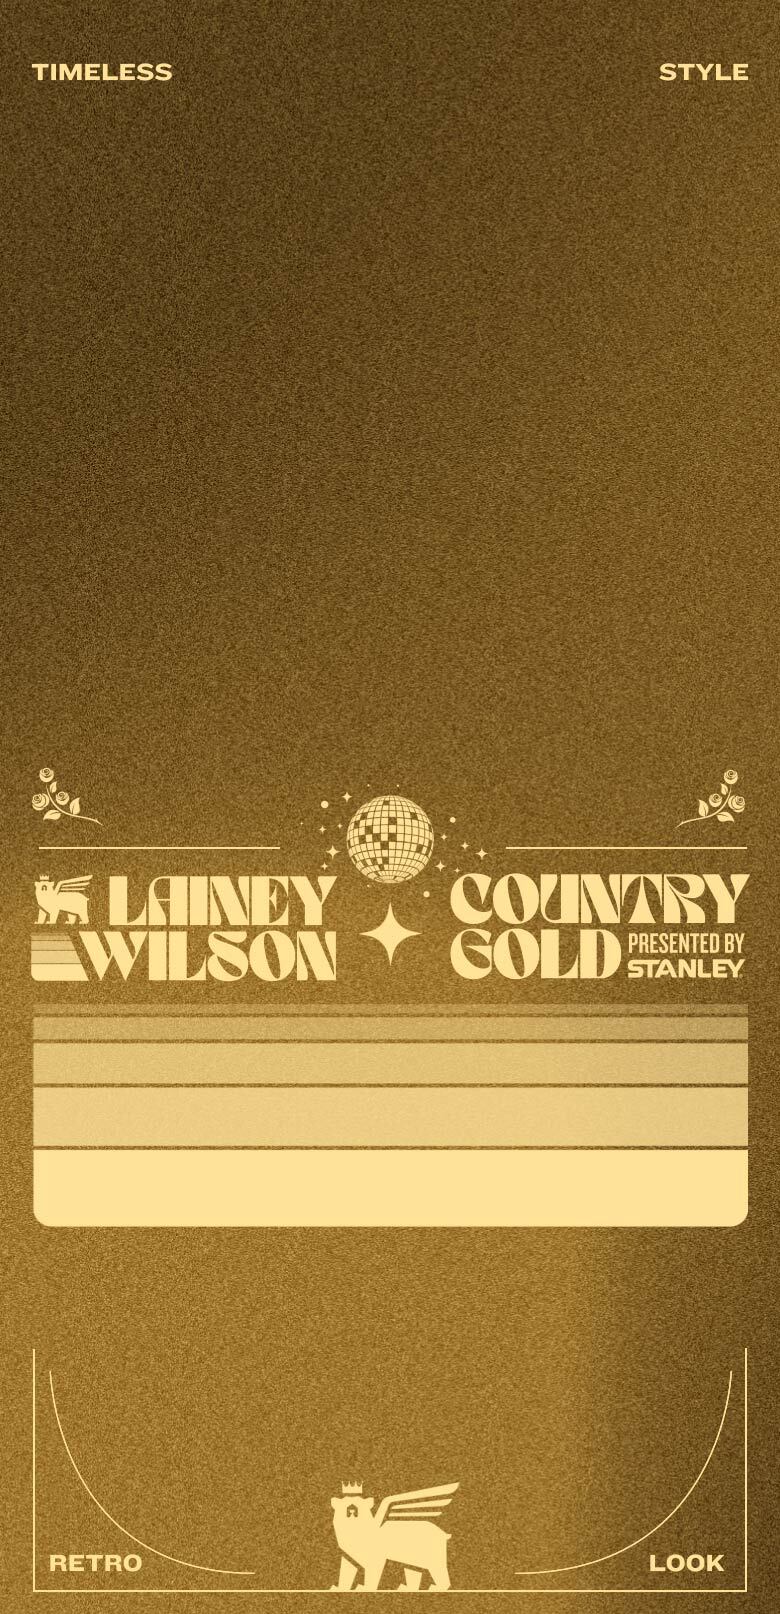 Lainey Wilson Country Gold Stanley: Where can I buy the limited